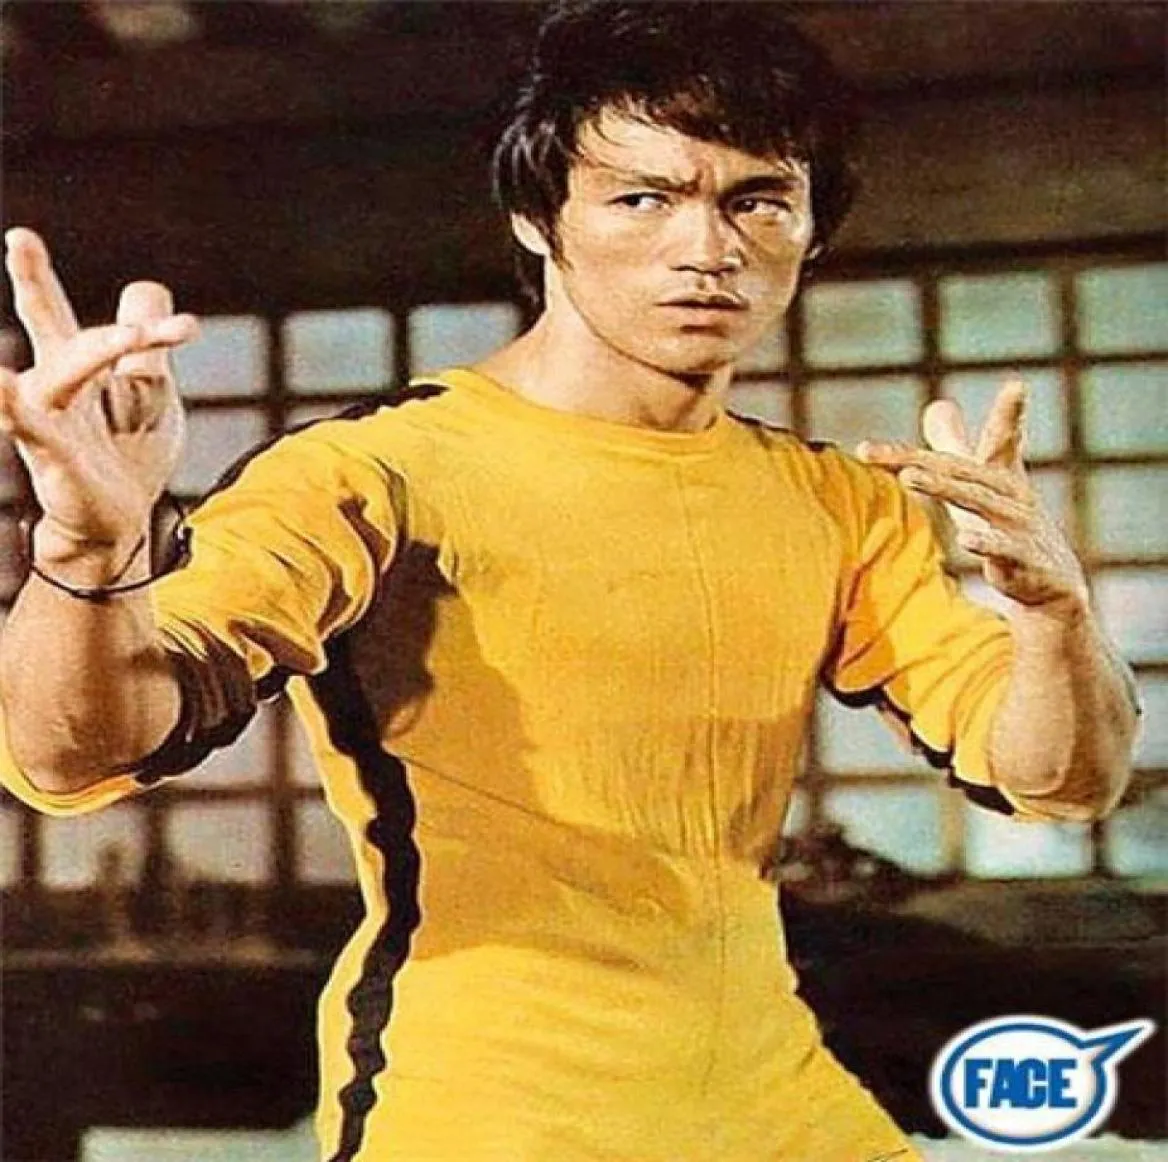 New Jeet Kune Do Game of Death Costume Jumpsuit Bruce Lee Classic Yellow Kung Fu Uniforms Cosplay JKD3087232